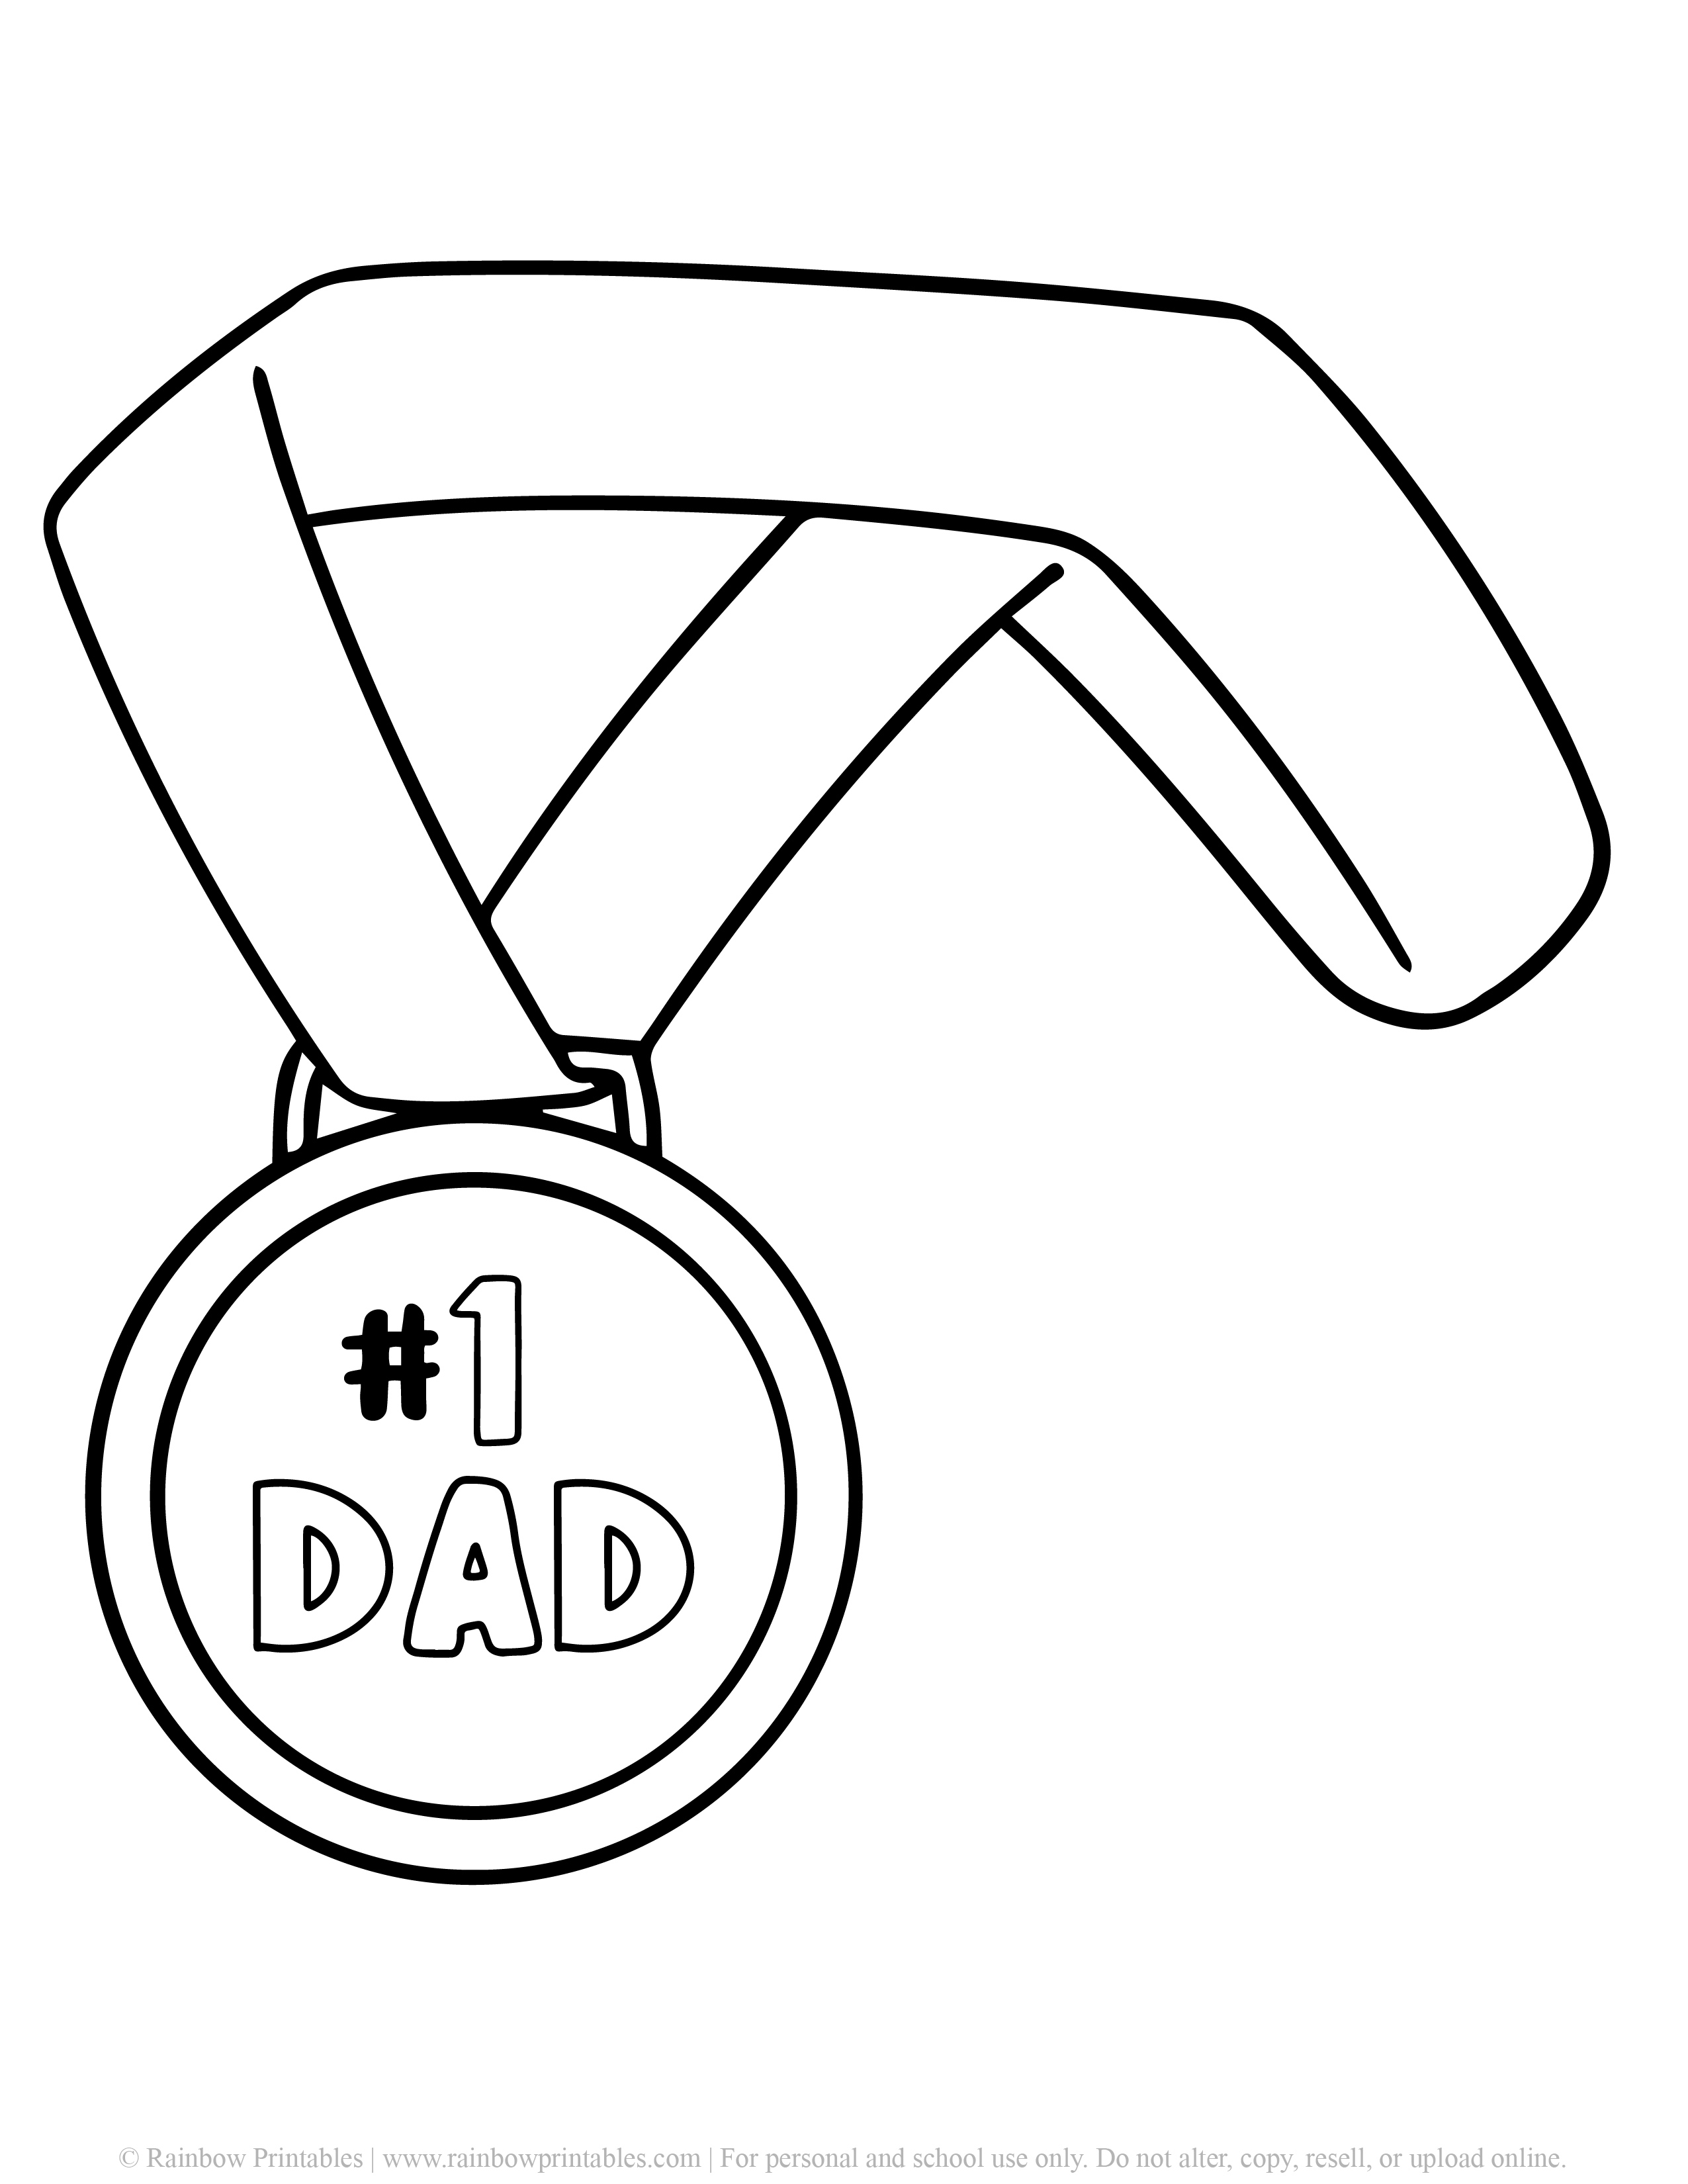 Father's Day Punny Cards & Coloring Pages Number 1 Dad Gold Metal Happy Father's Day First Place Printable BW